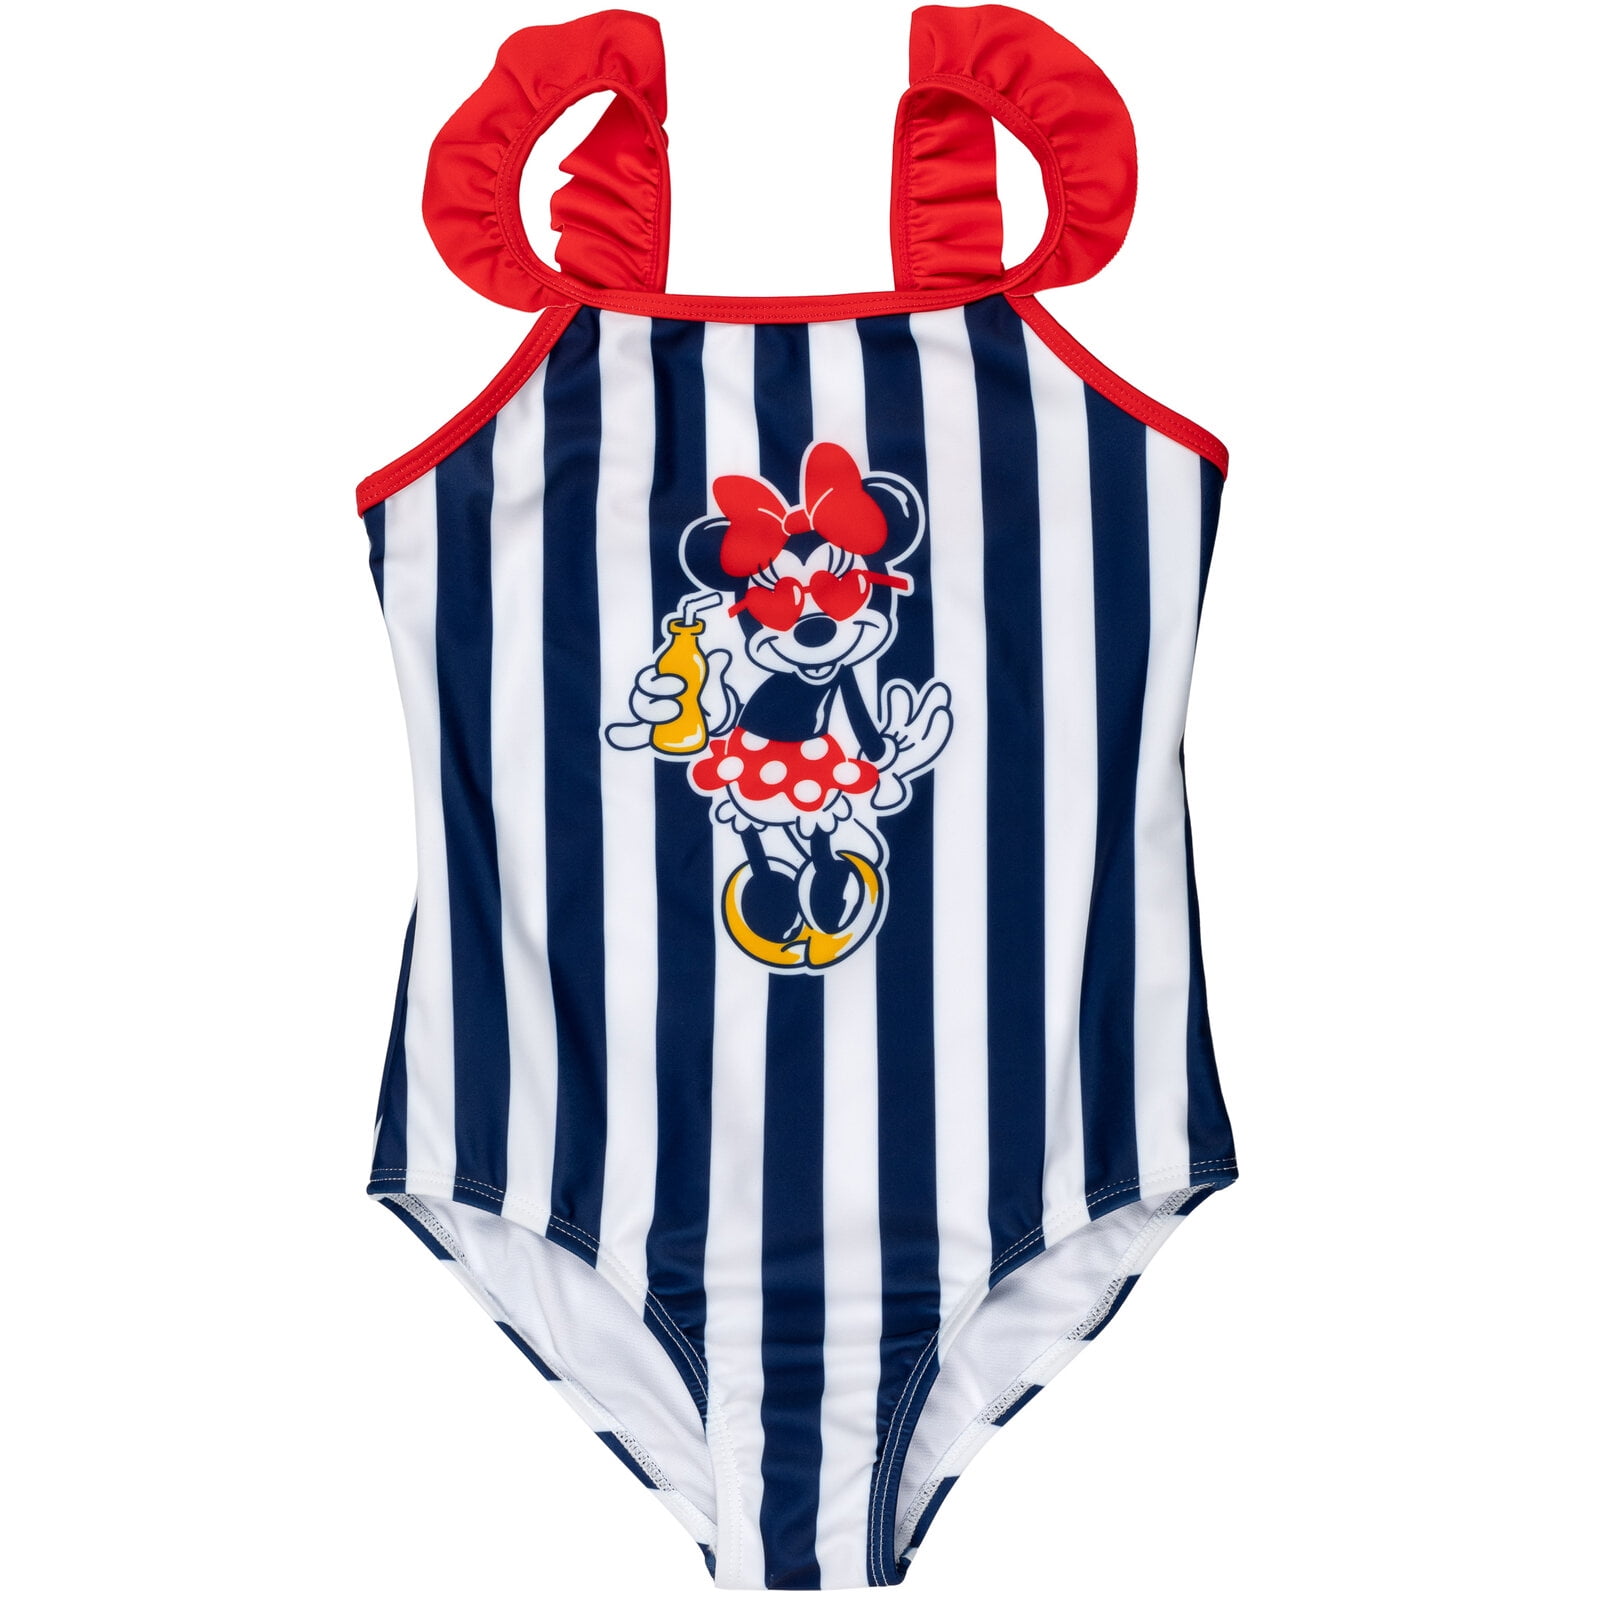 Disney Baby Girls Infant Minnie Mouse One-Piece Swimsuit